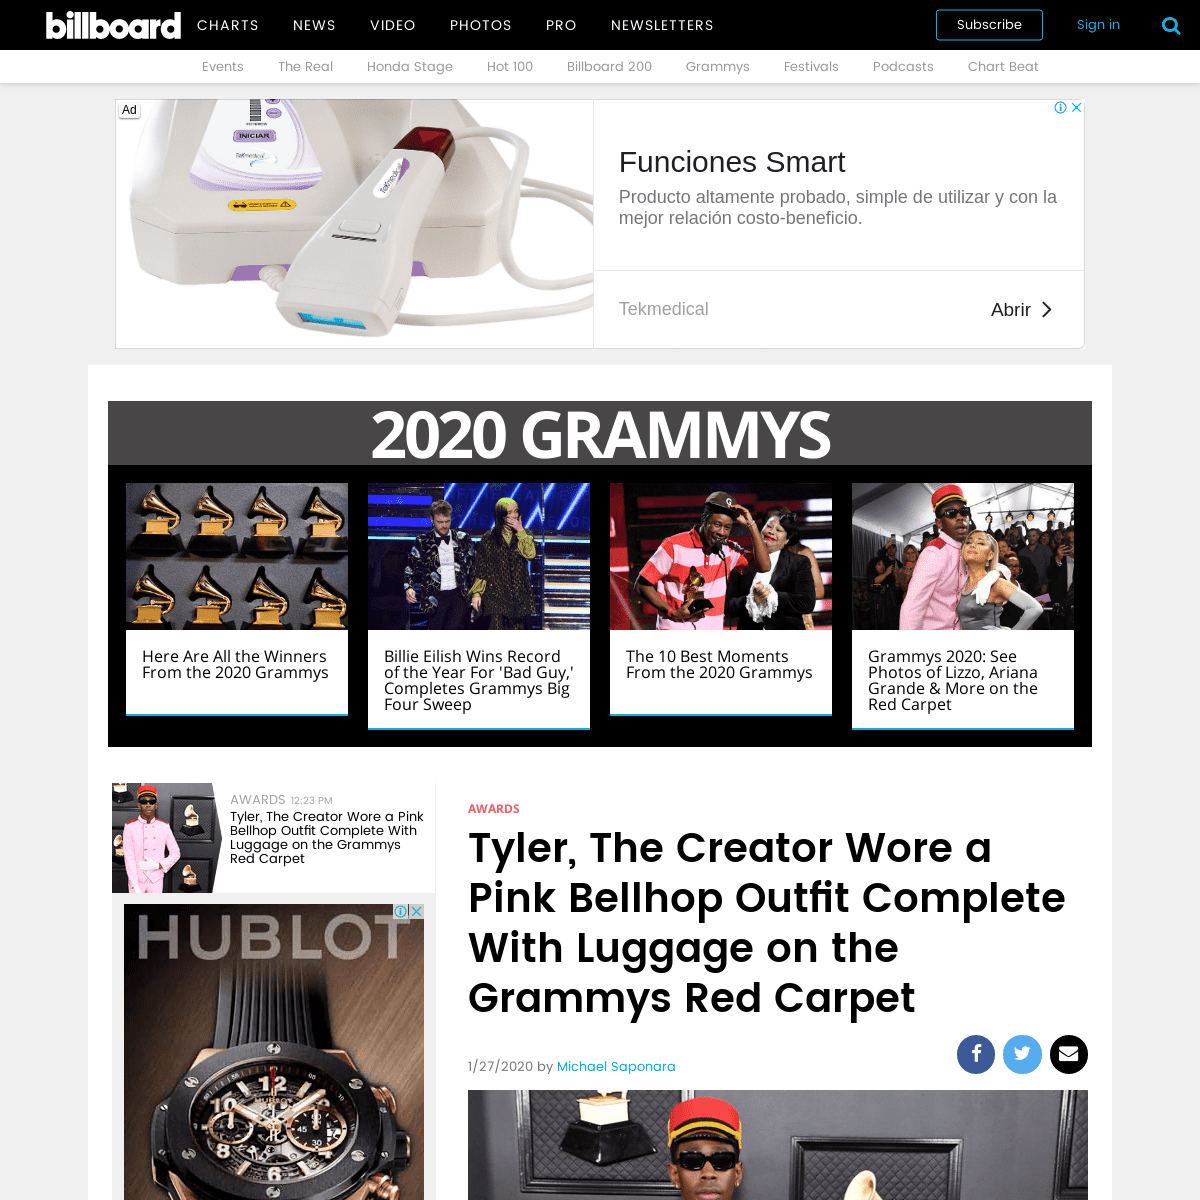 A complete backup of www.billboard.com/articles/news/awards/8549323/tyler-the-creator-bellhop-outfit-grammys-photos